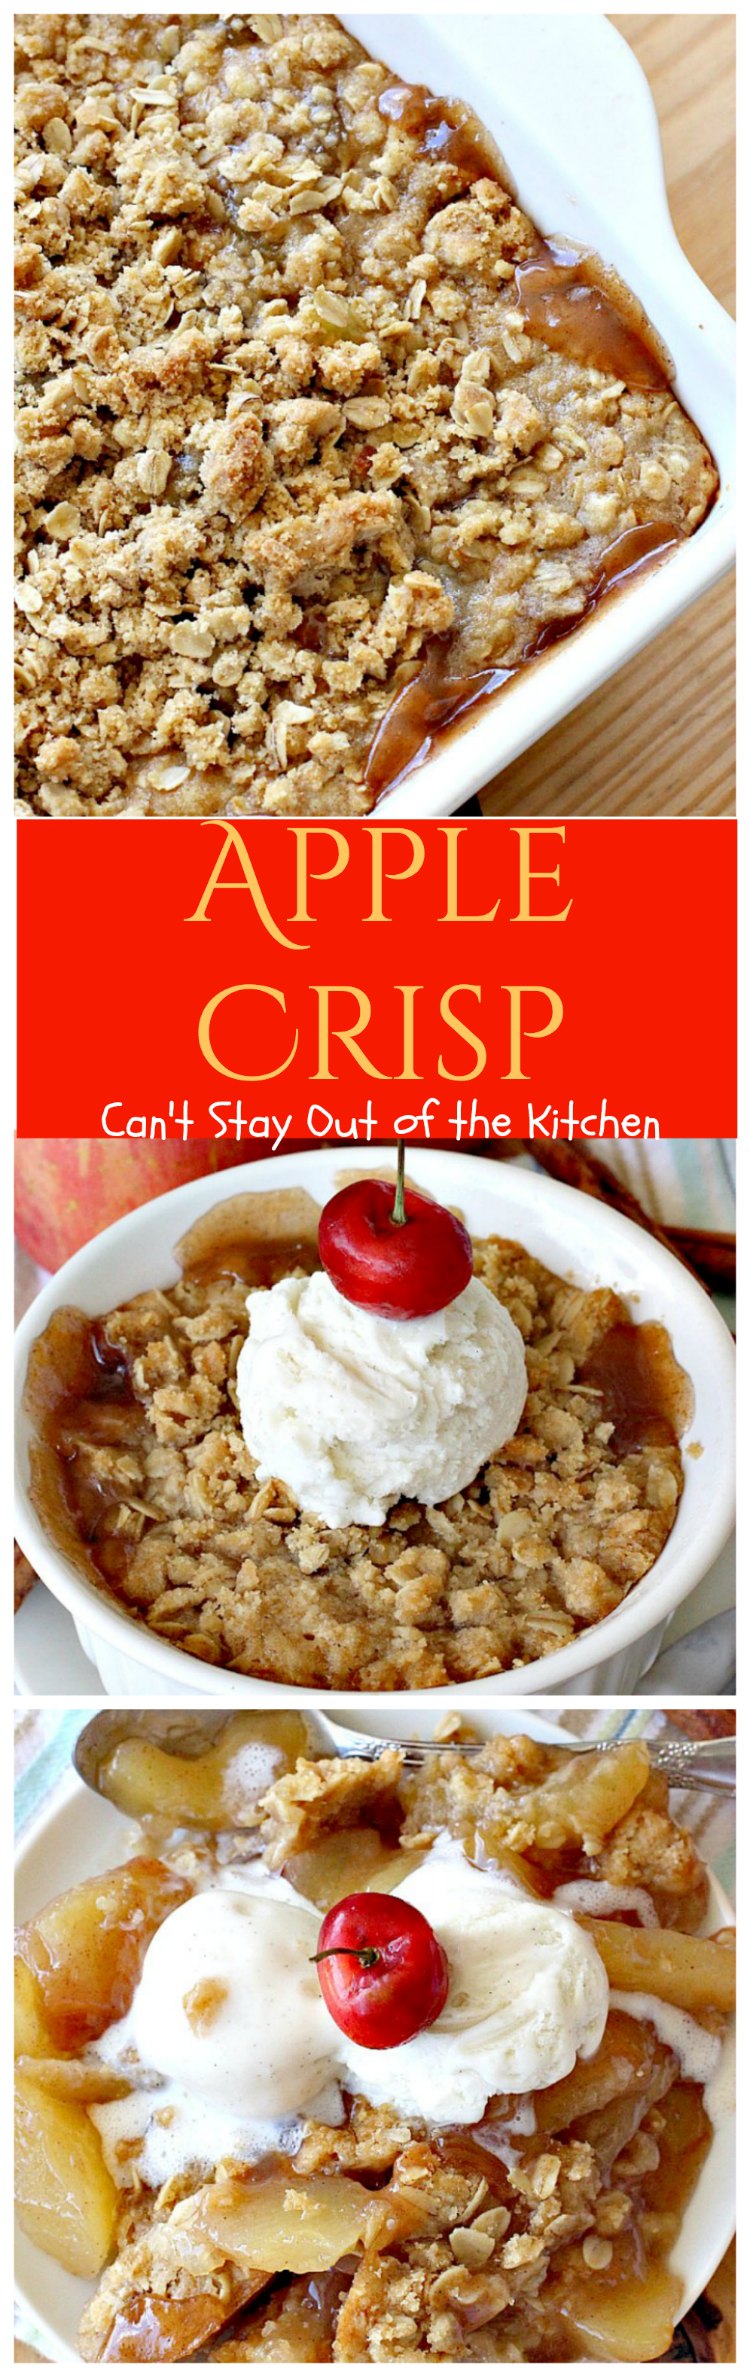 Apple Crisp | Can't Stay Out of the Kitchen